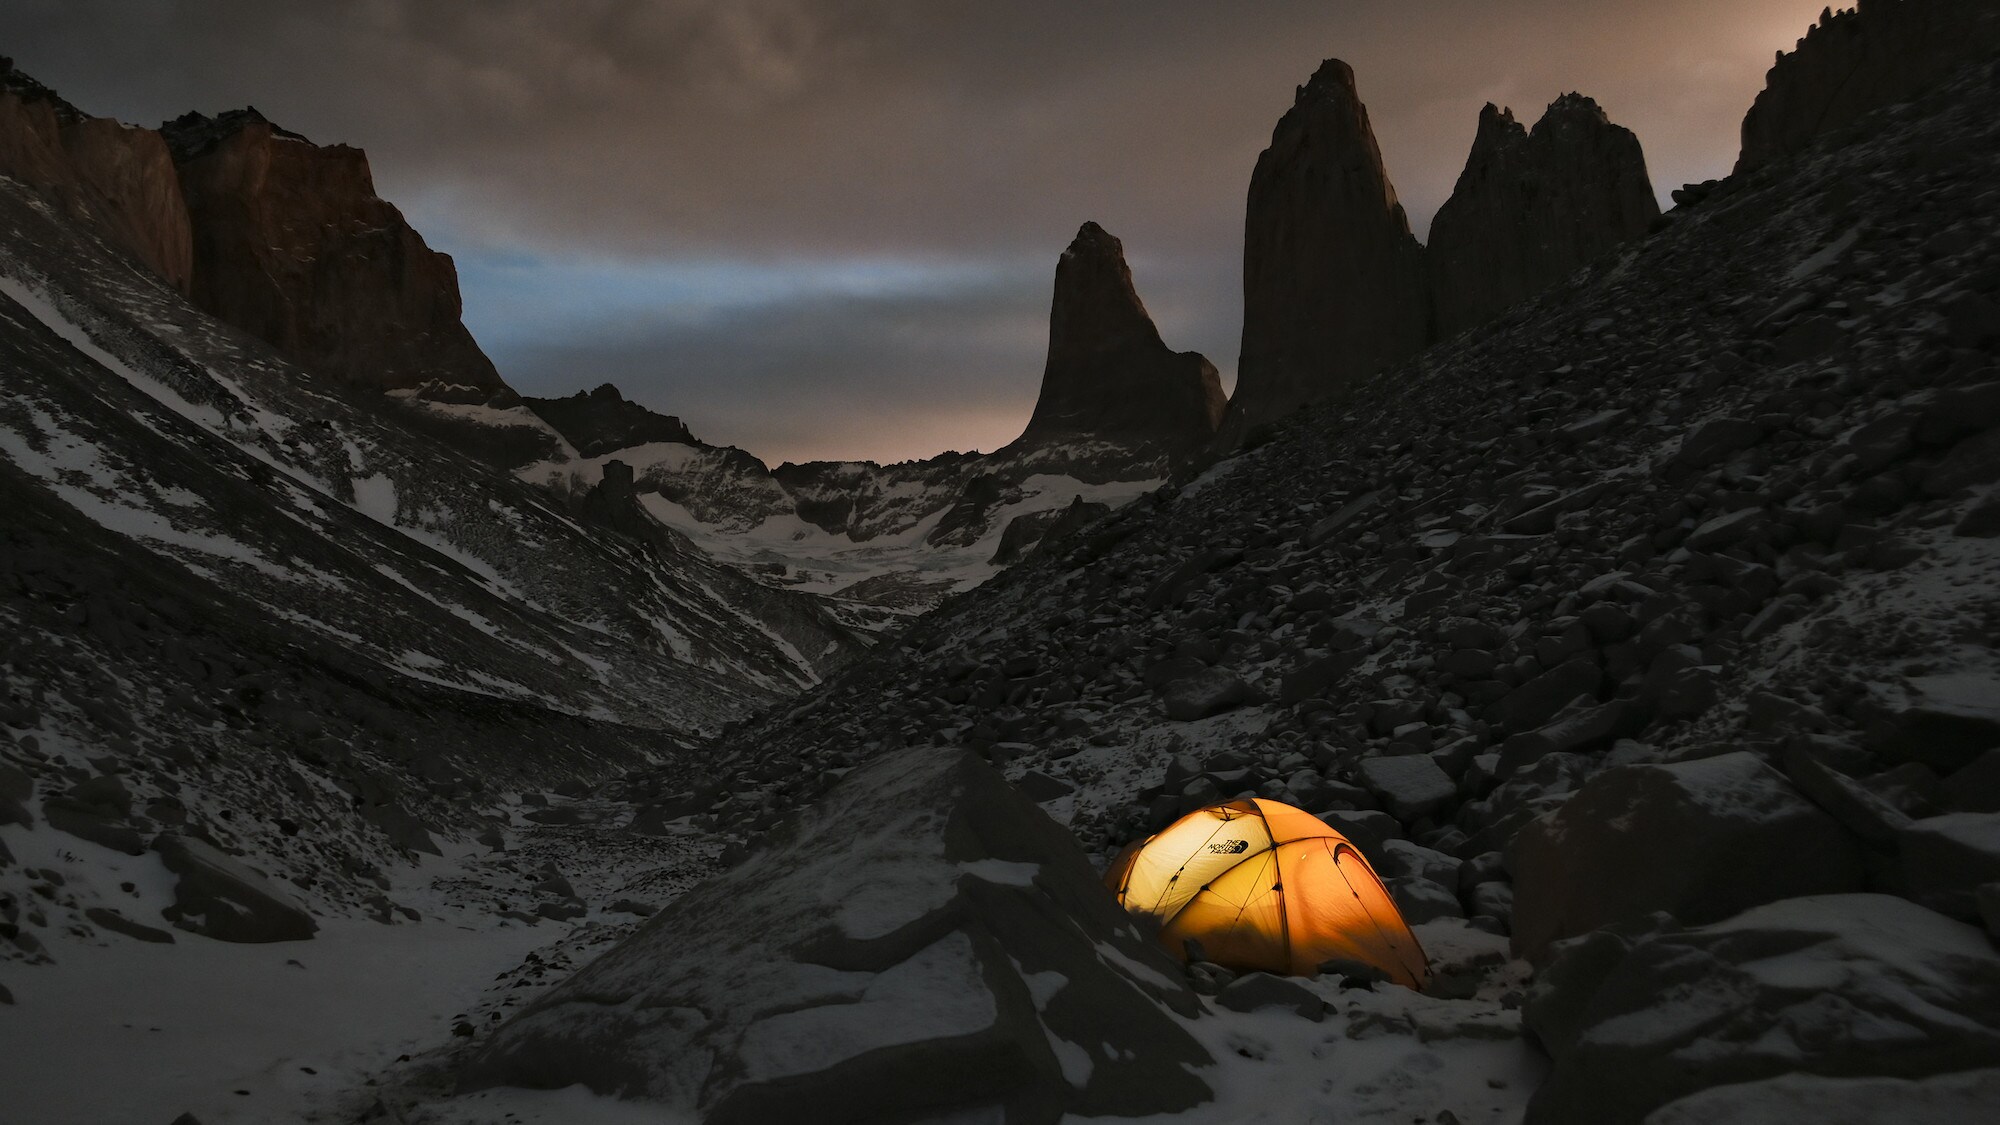 Night shot of a tent nestled between the rocks. National Geographic for Disney+/Keith Partridge)